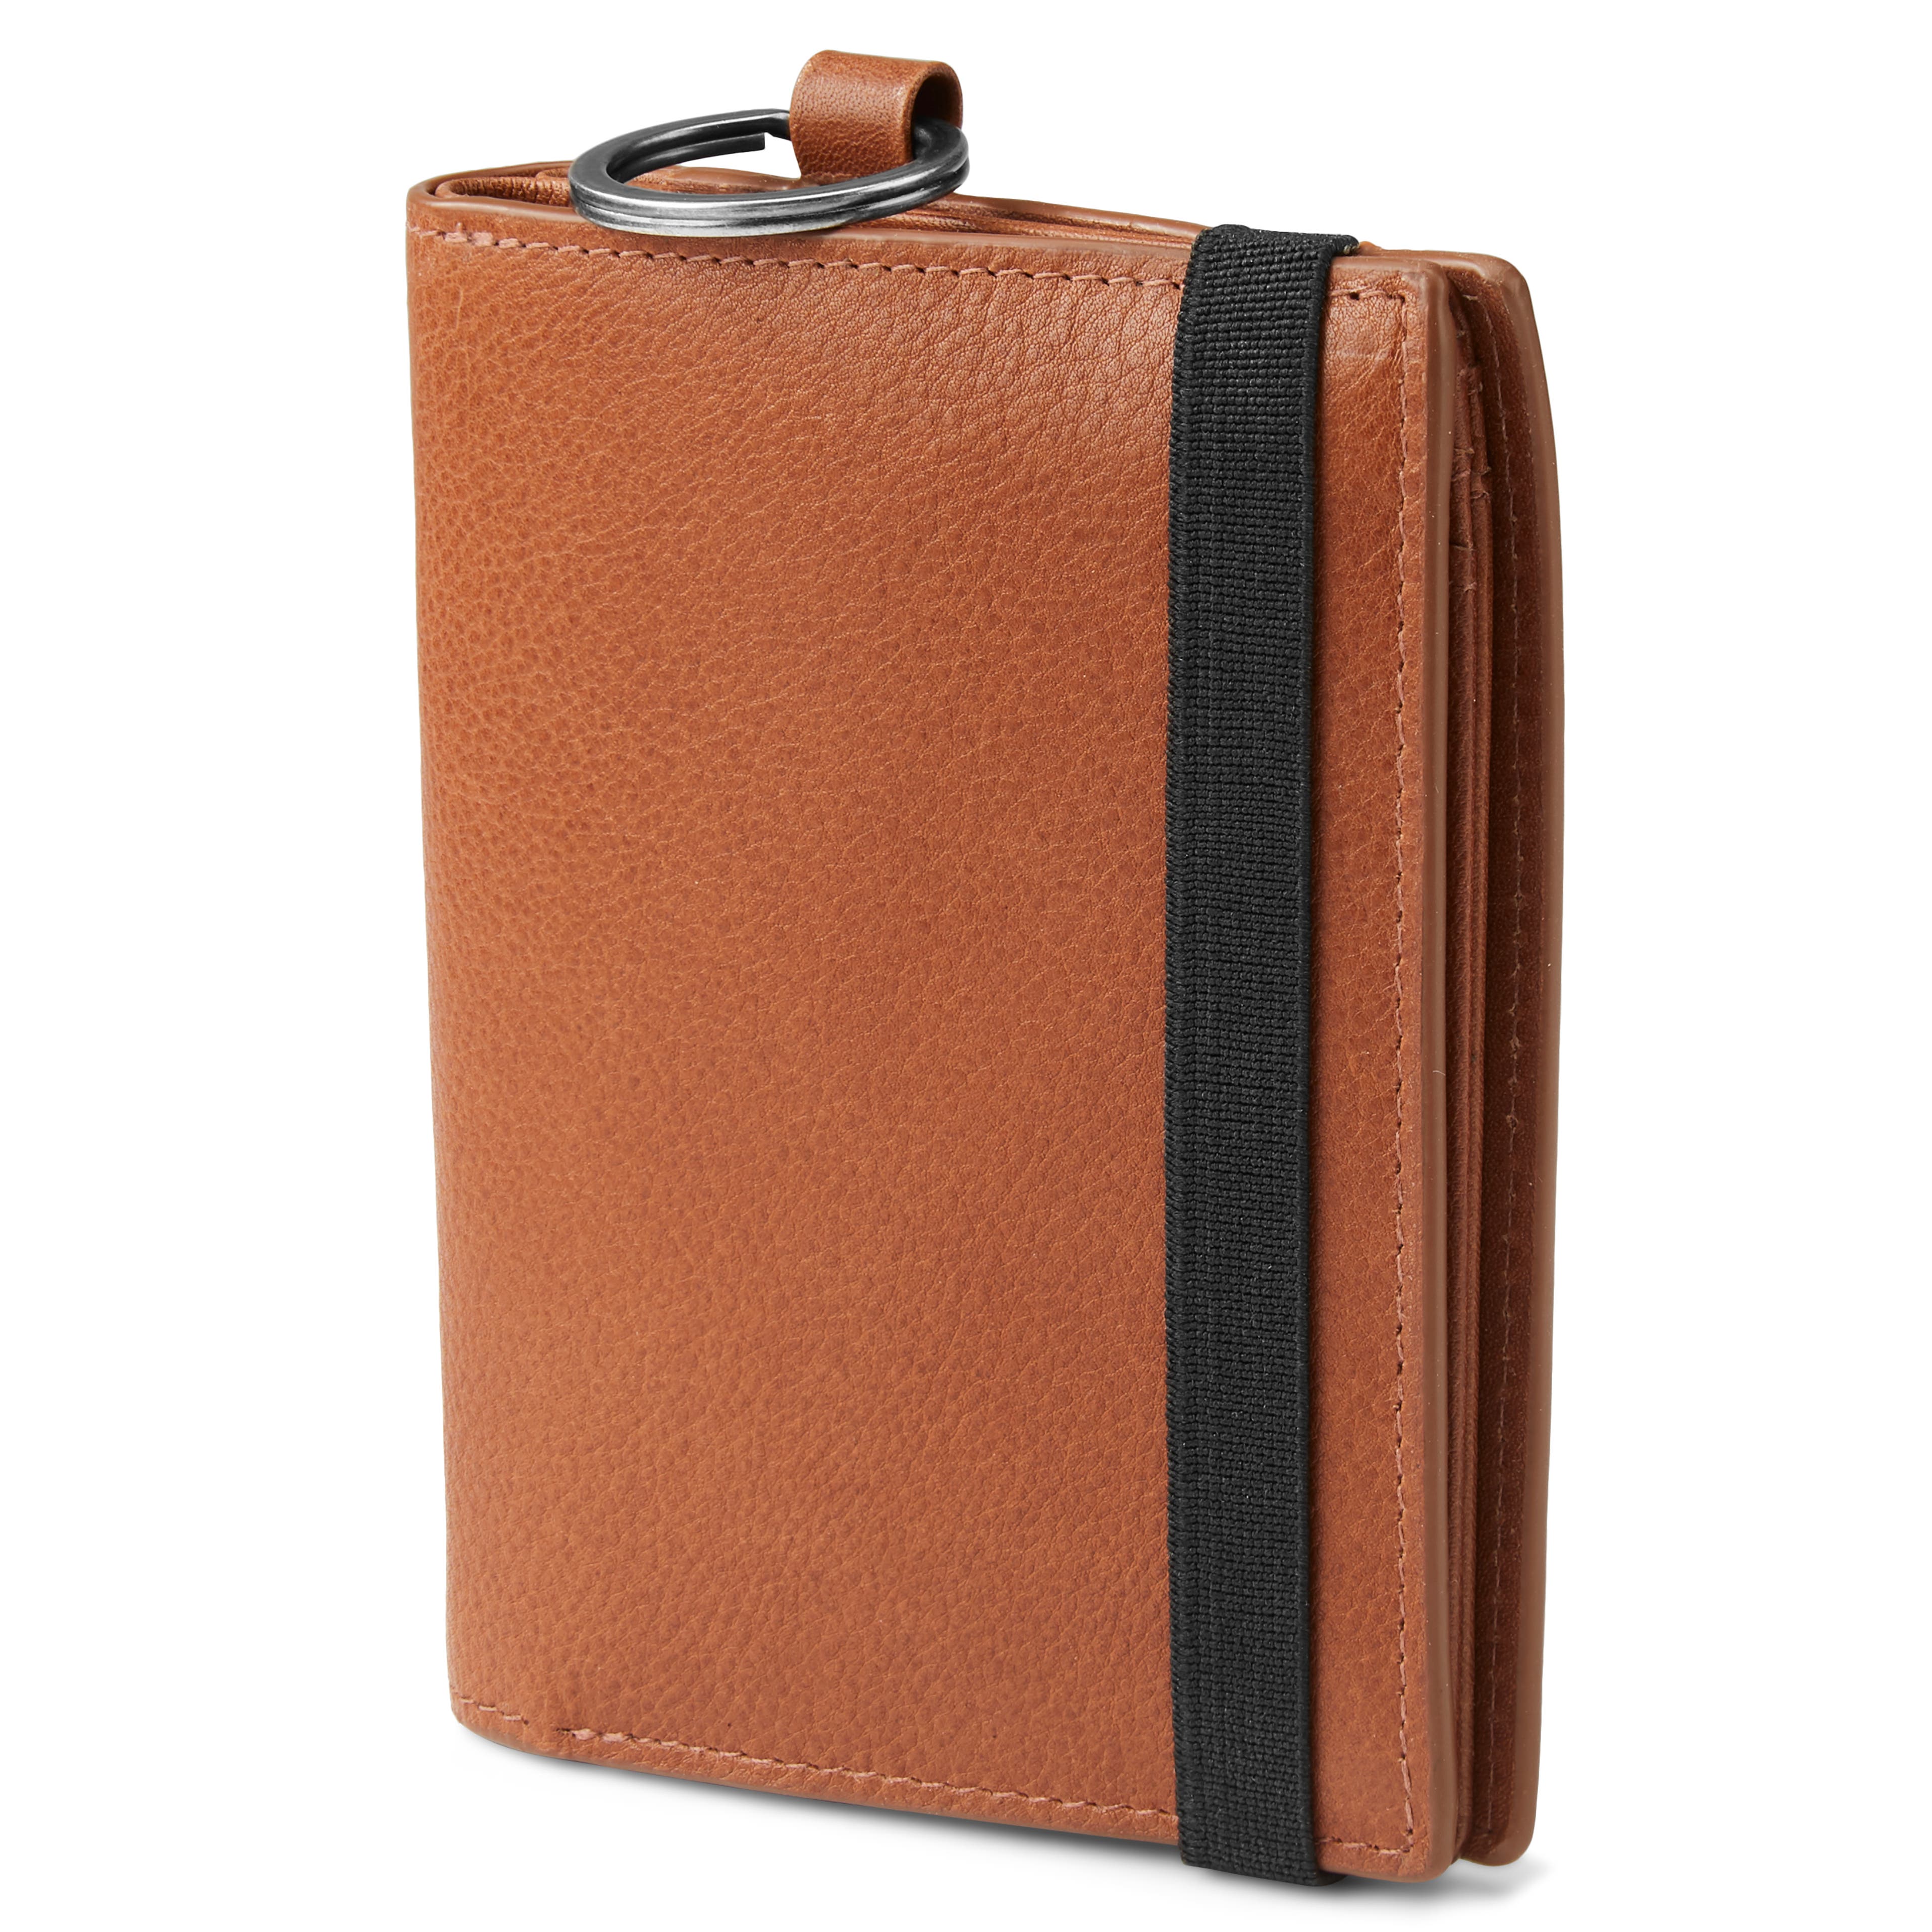 Lonnie Tan Leather RFID-Blocking Wallet with Keyring 